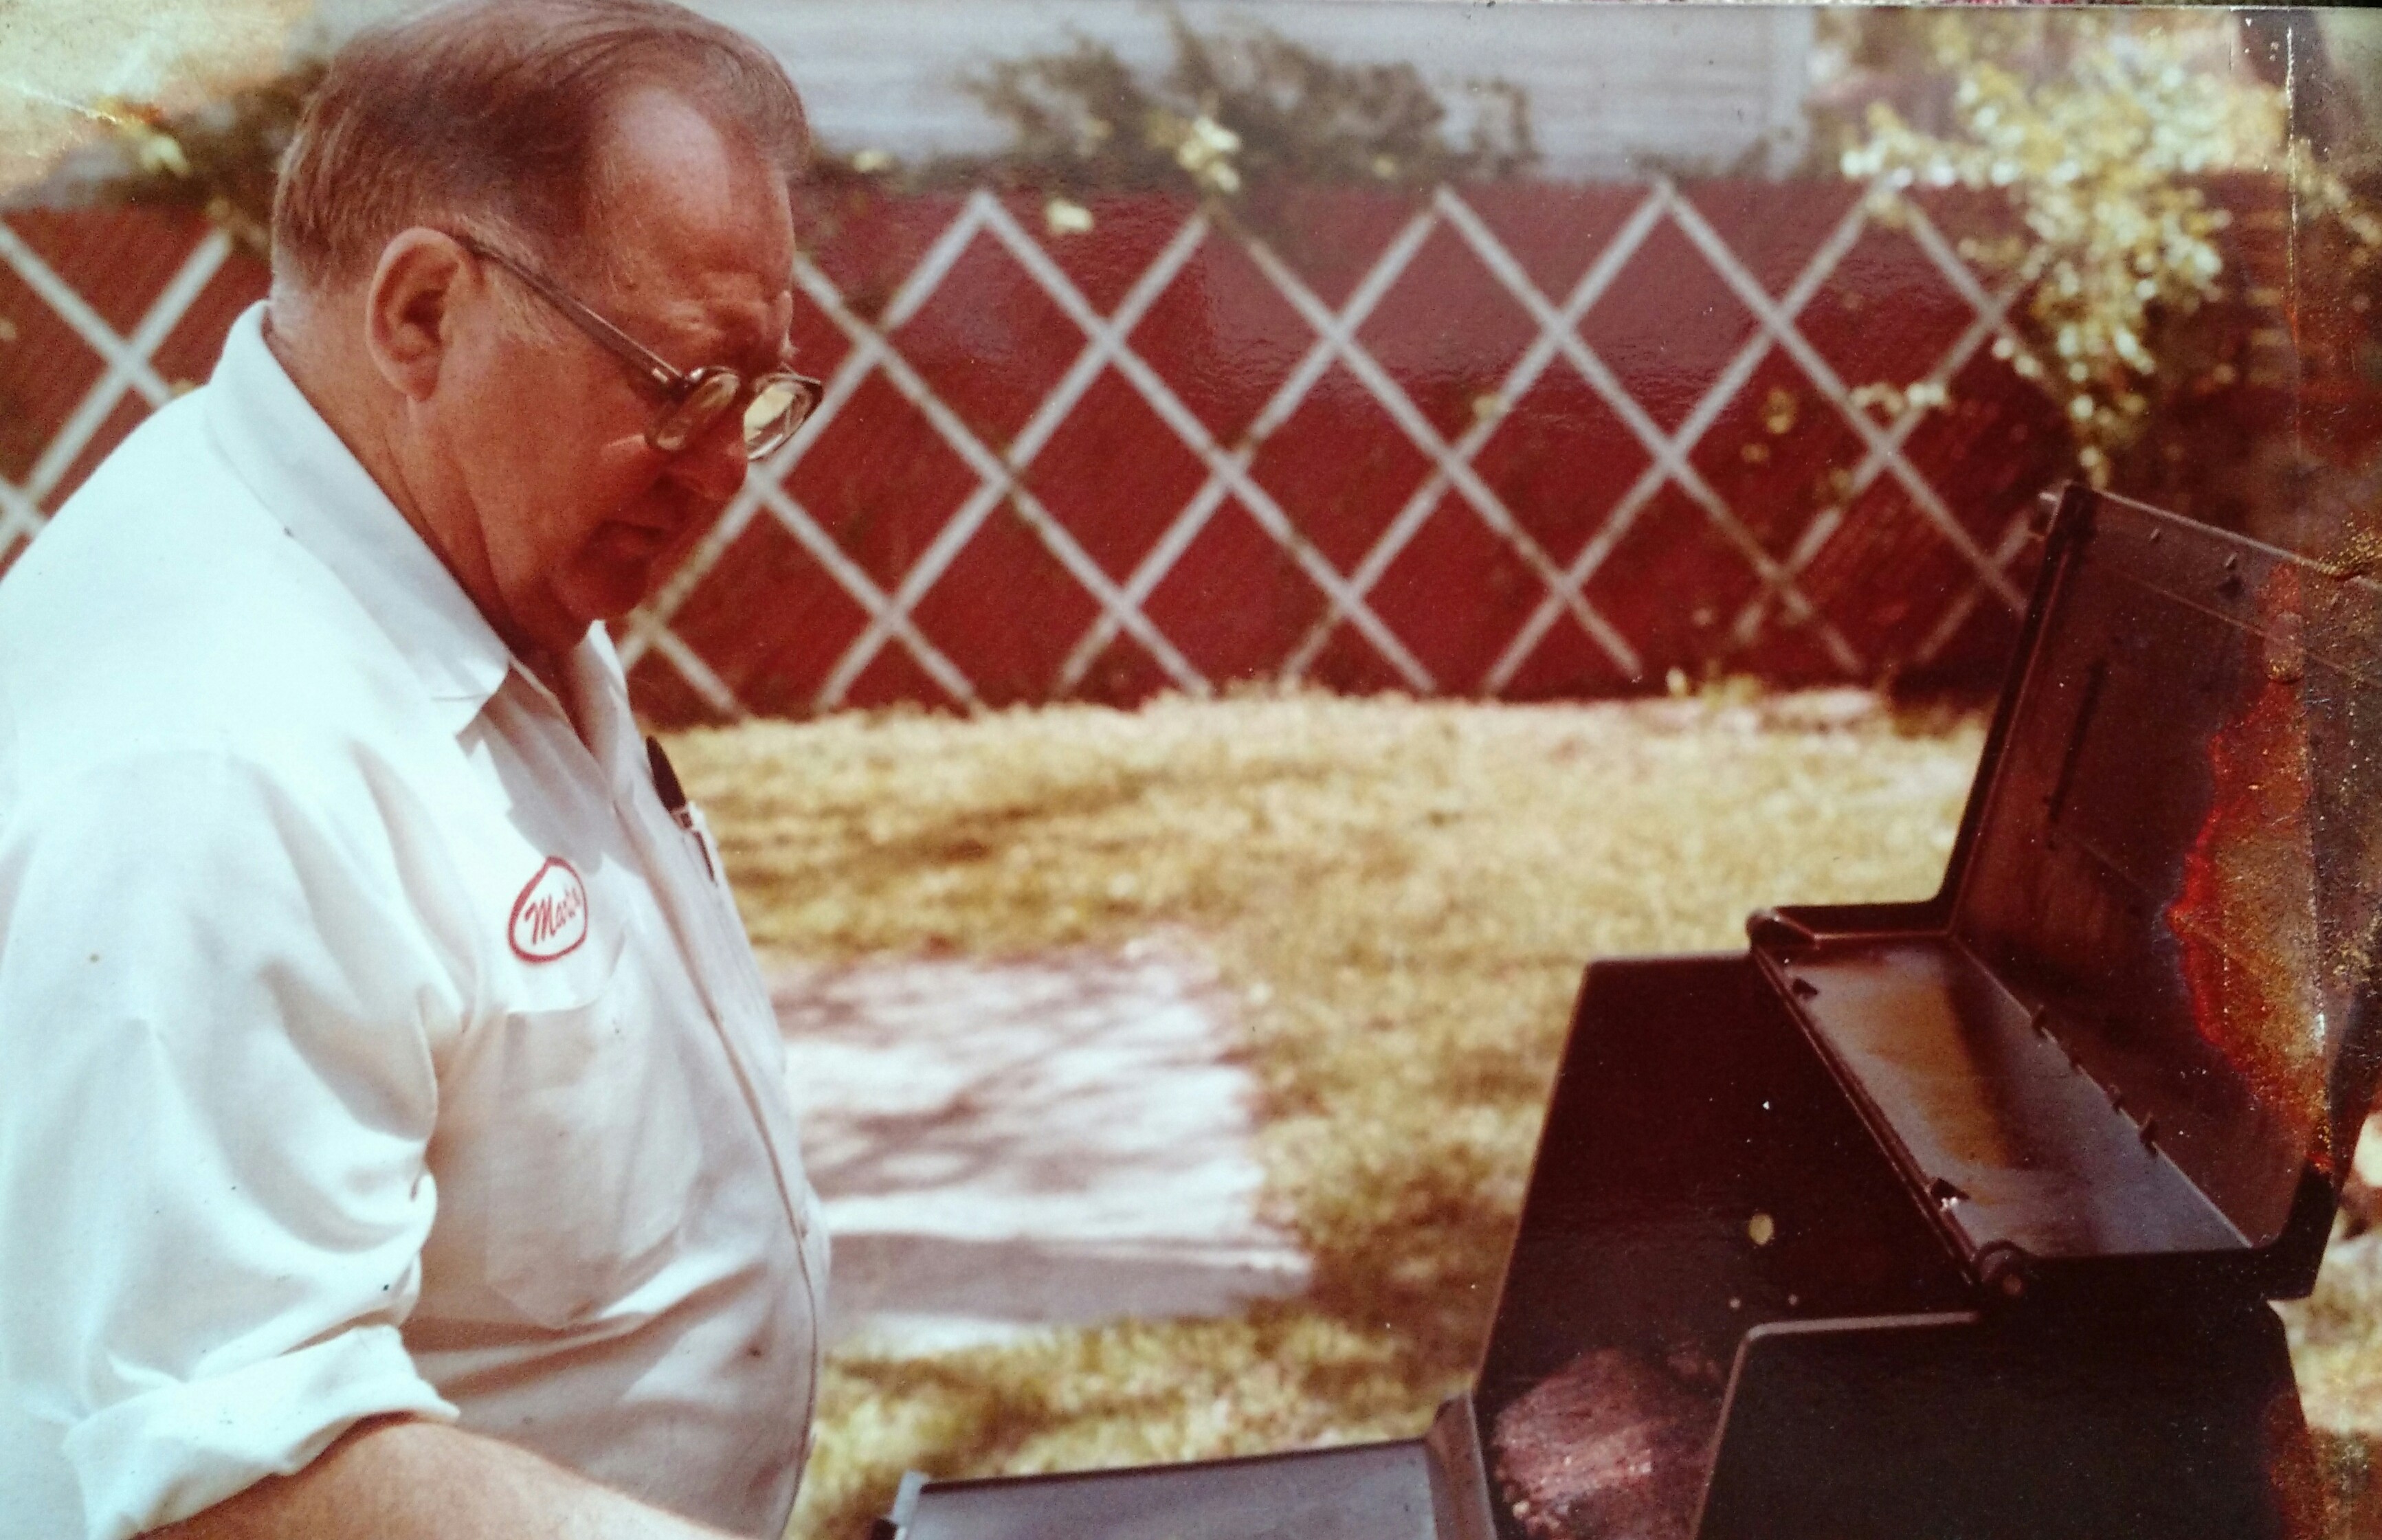 Granddad at the grill. early 1980s.